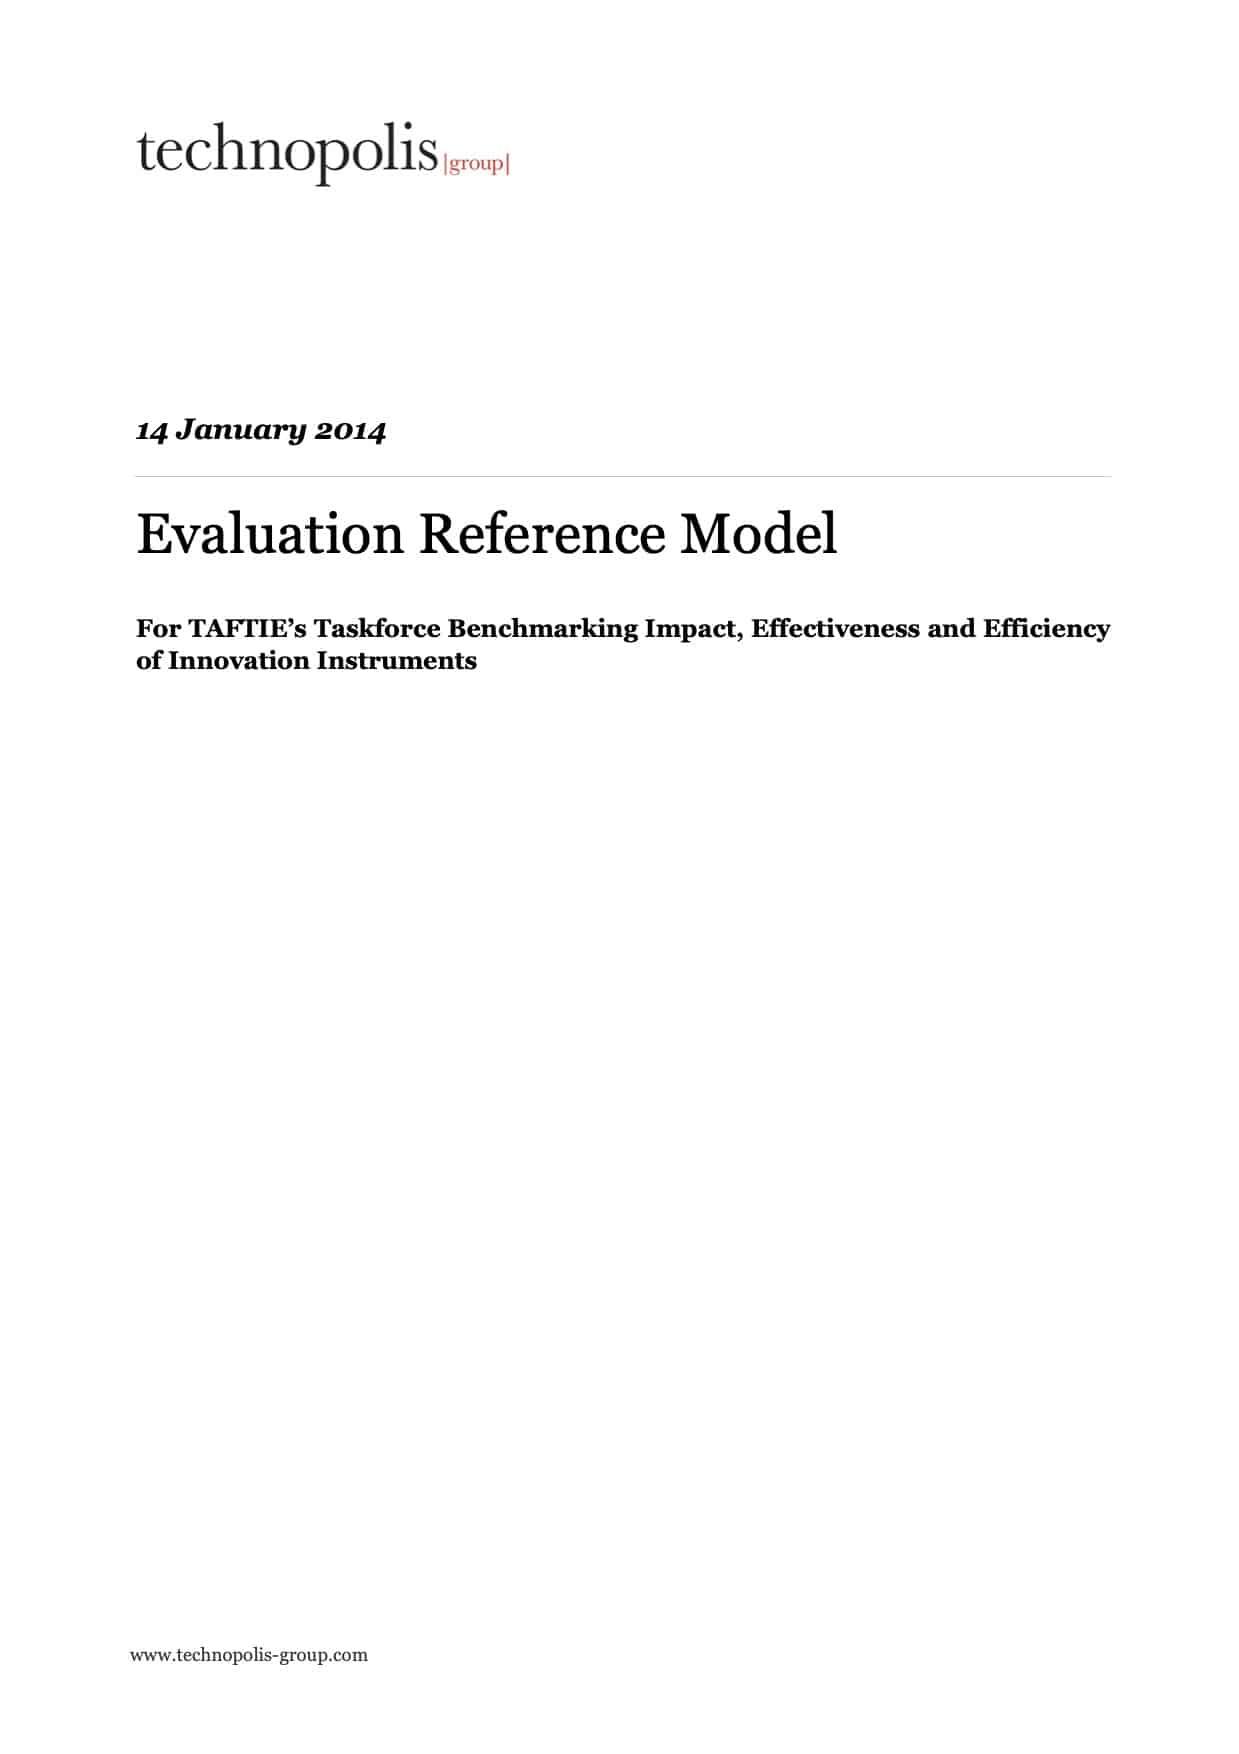 TAFTIE’s Taskforce Benchmarking Impact, Effectiveness and Efficiency of Innovation Instruments – Evaluation Reference Model